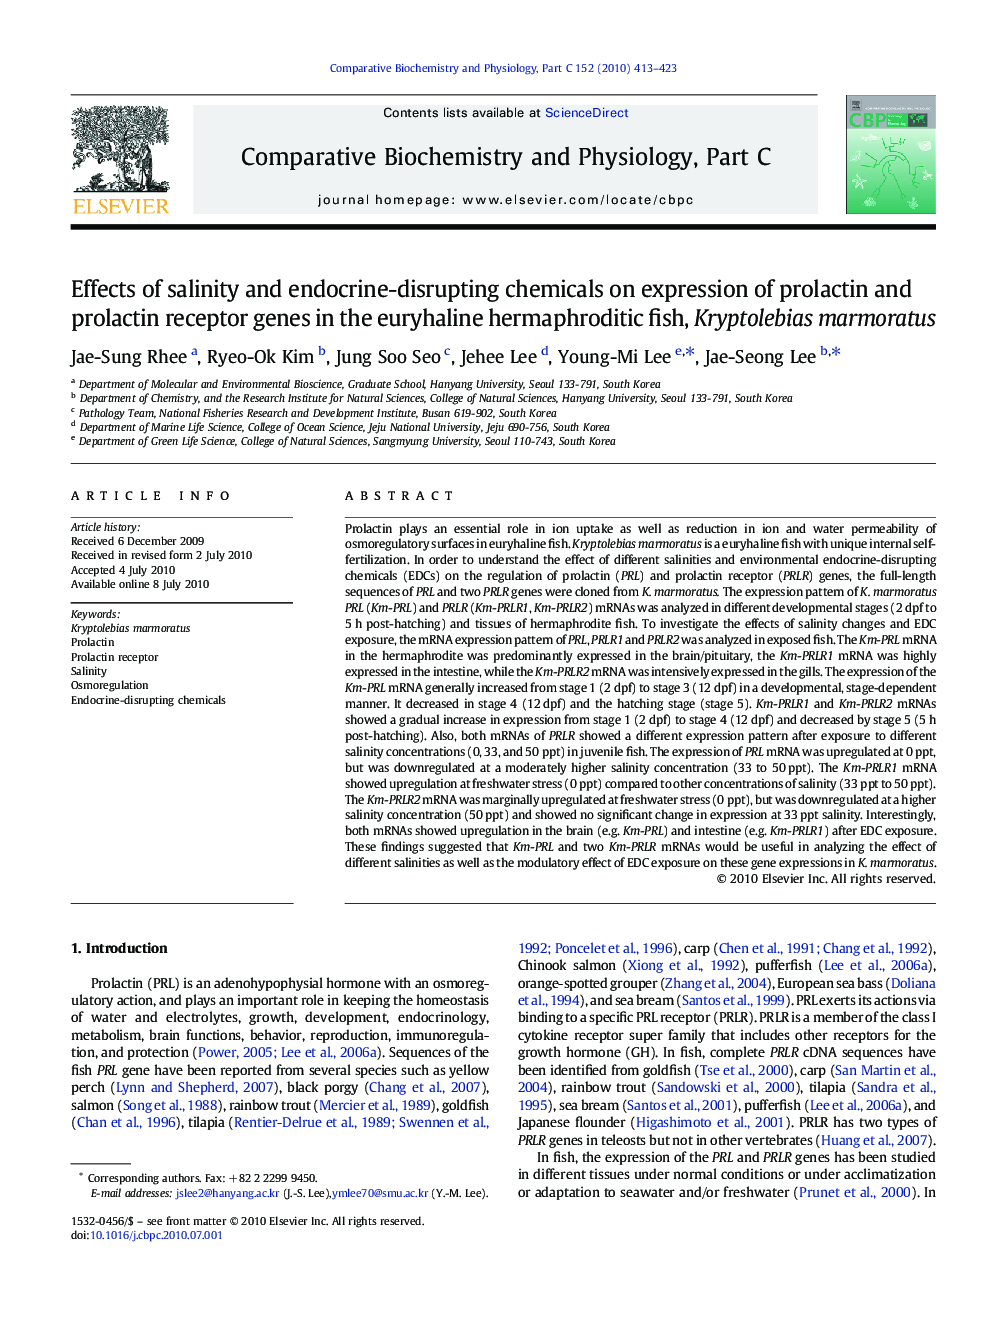 Effects of salinity and endocrine-disrupting chemicals on expression of prolactin and prolactin receptor genes in the euryhaline hermaphroditic fish, Kryptolebias marmoratus